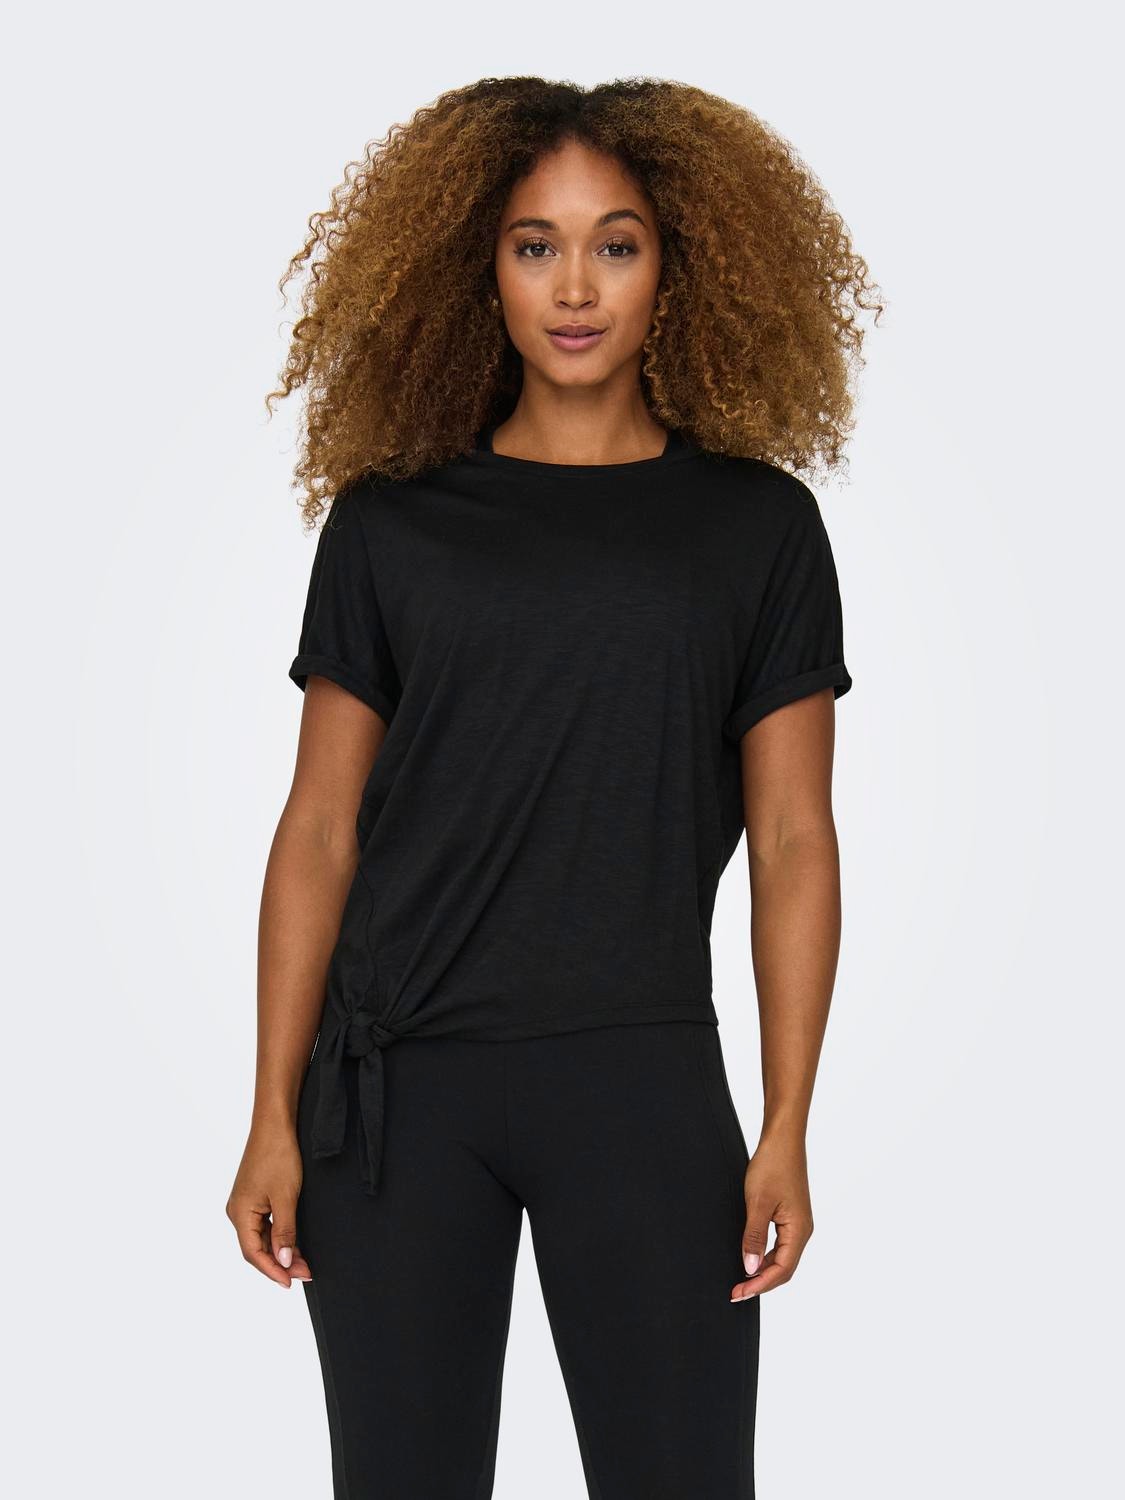 ONLY Loose Fit Round Neck T-Shirt -Black - 15302768